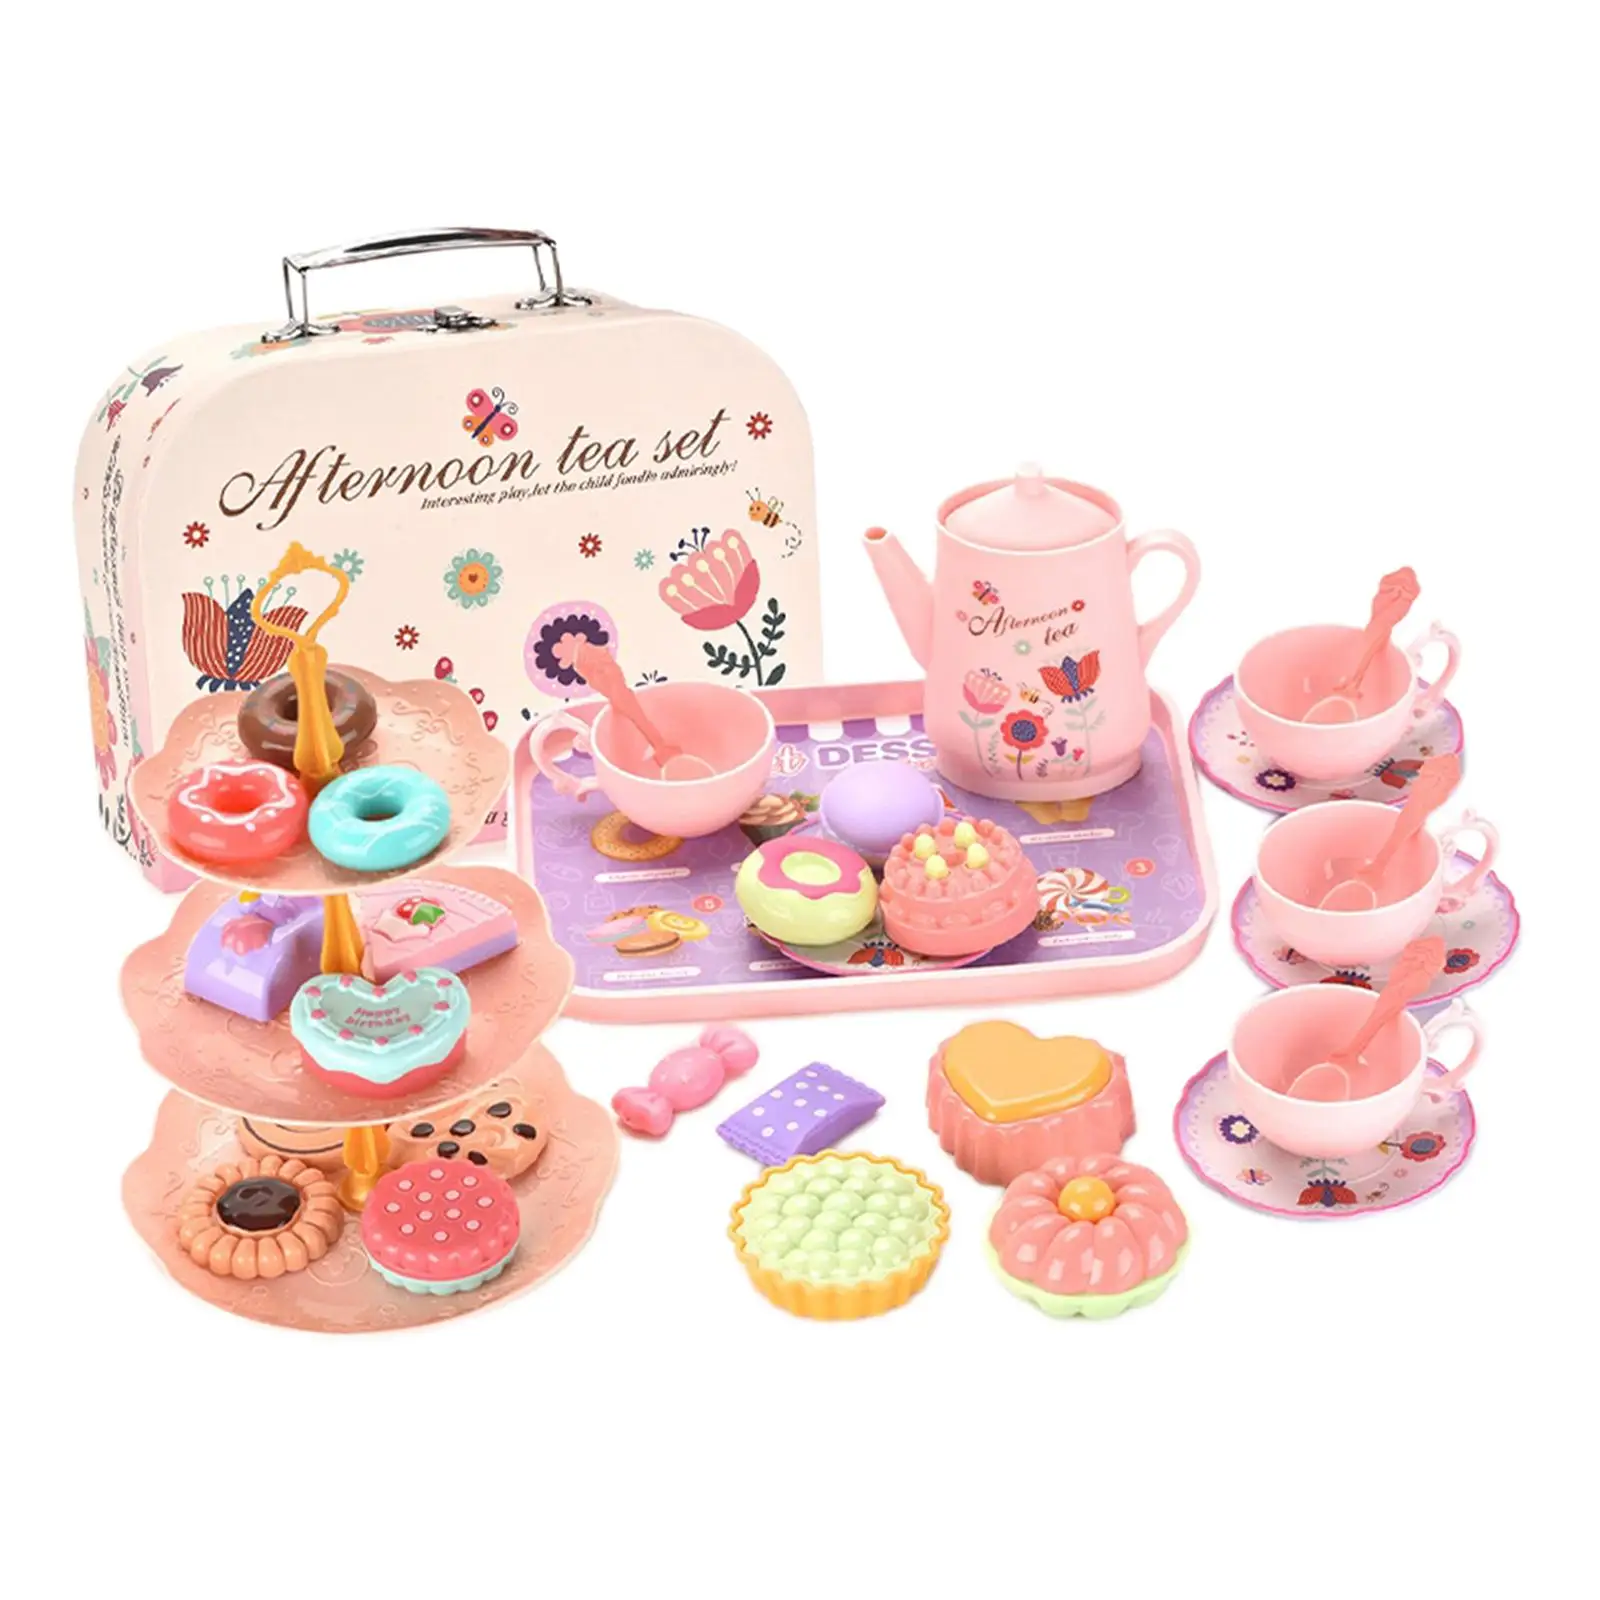 Simulation Tea Cake Set Developmental Gifts Play House Kitchen Afternoon Tea Game for Children Baby Boys Kids Party